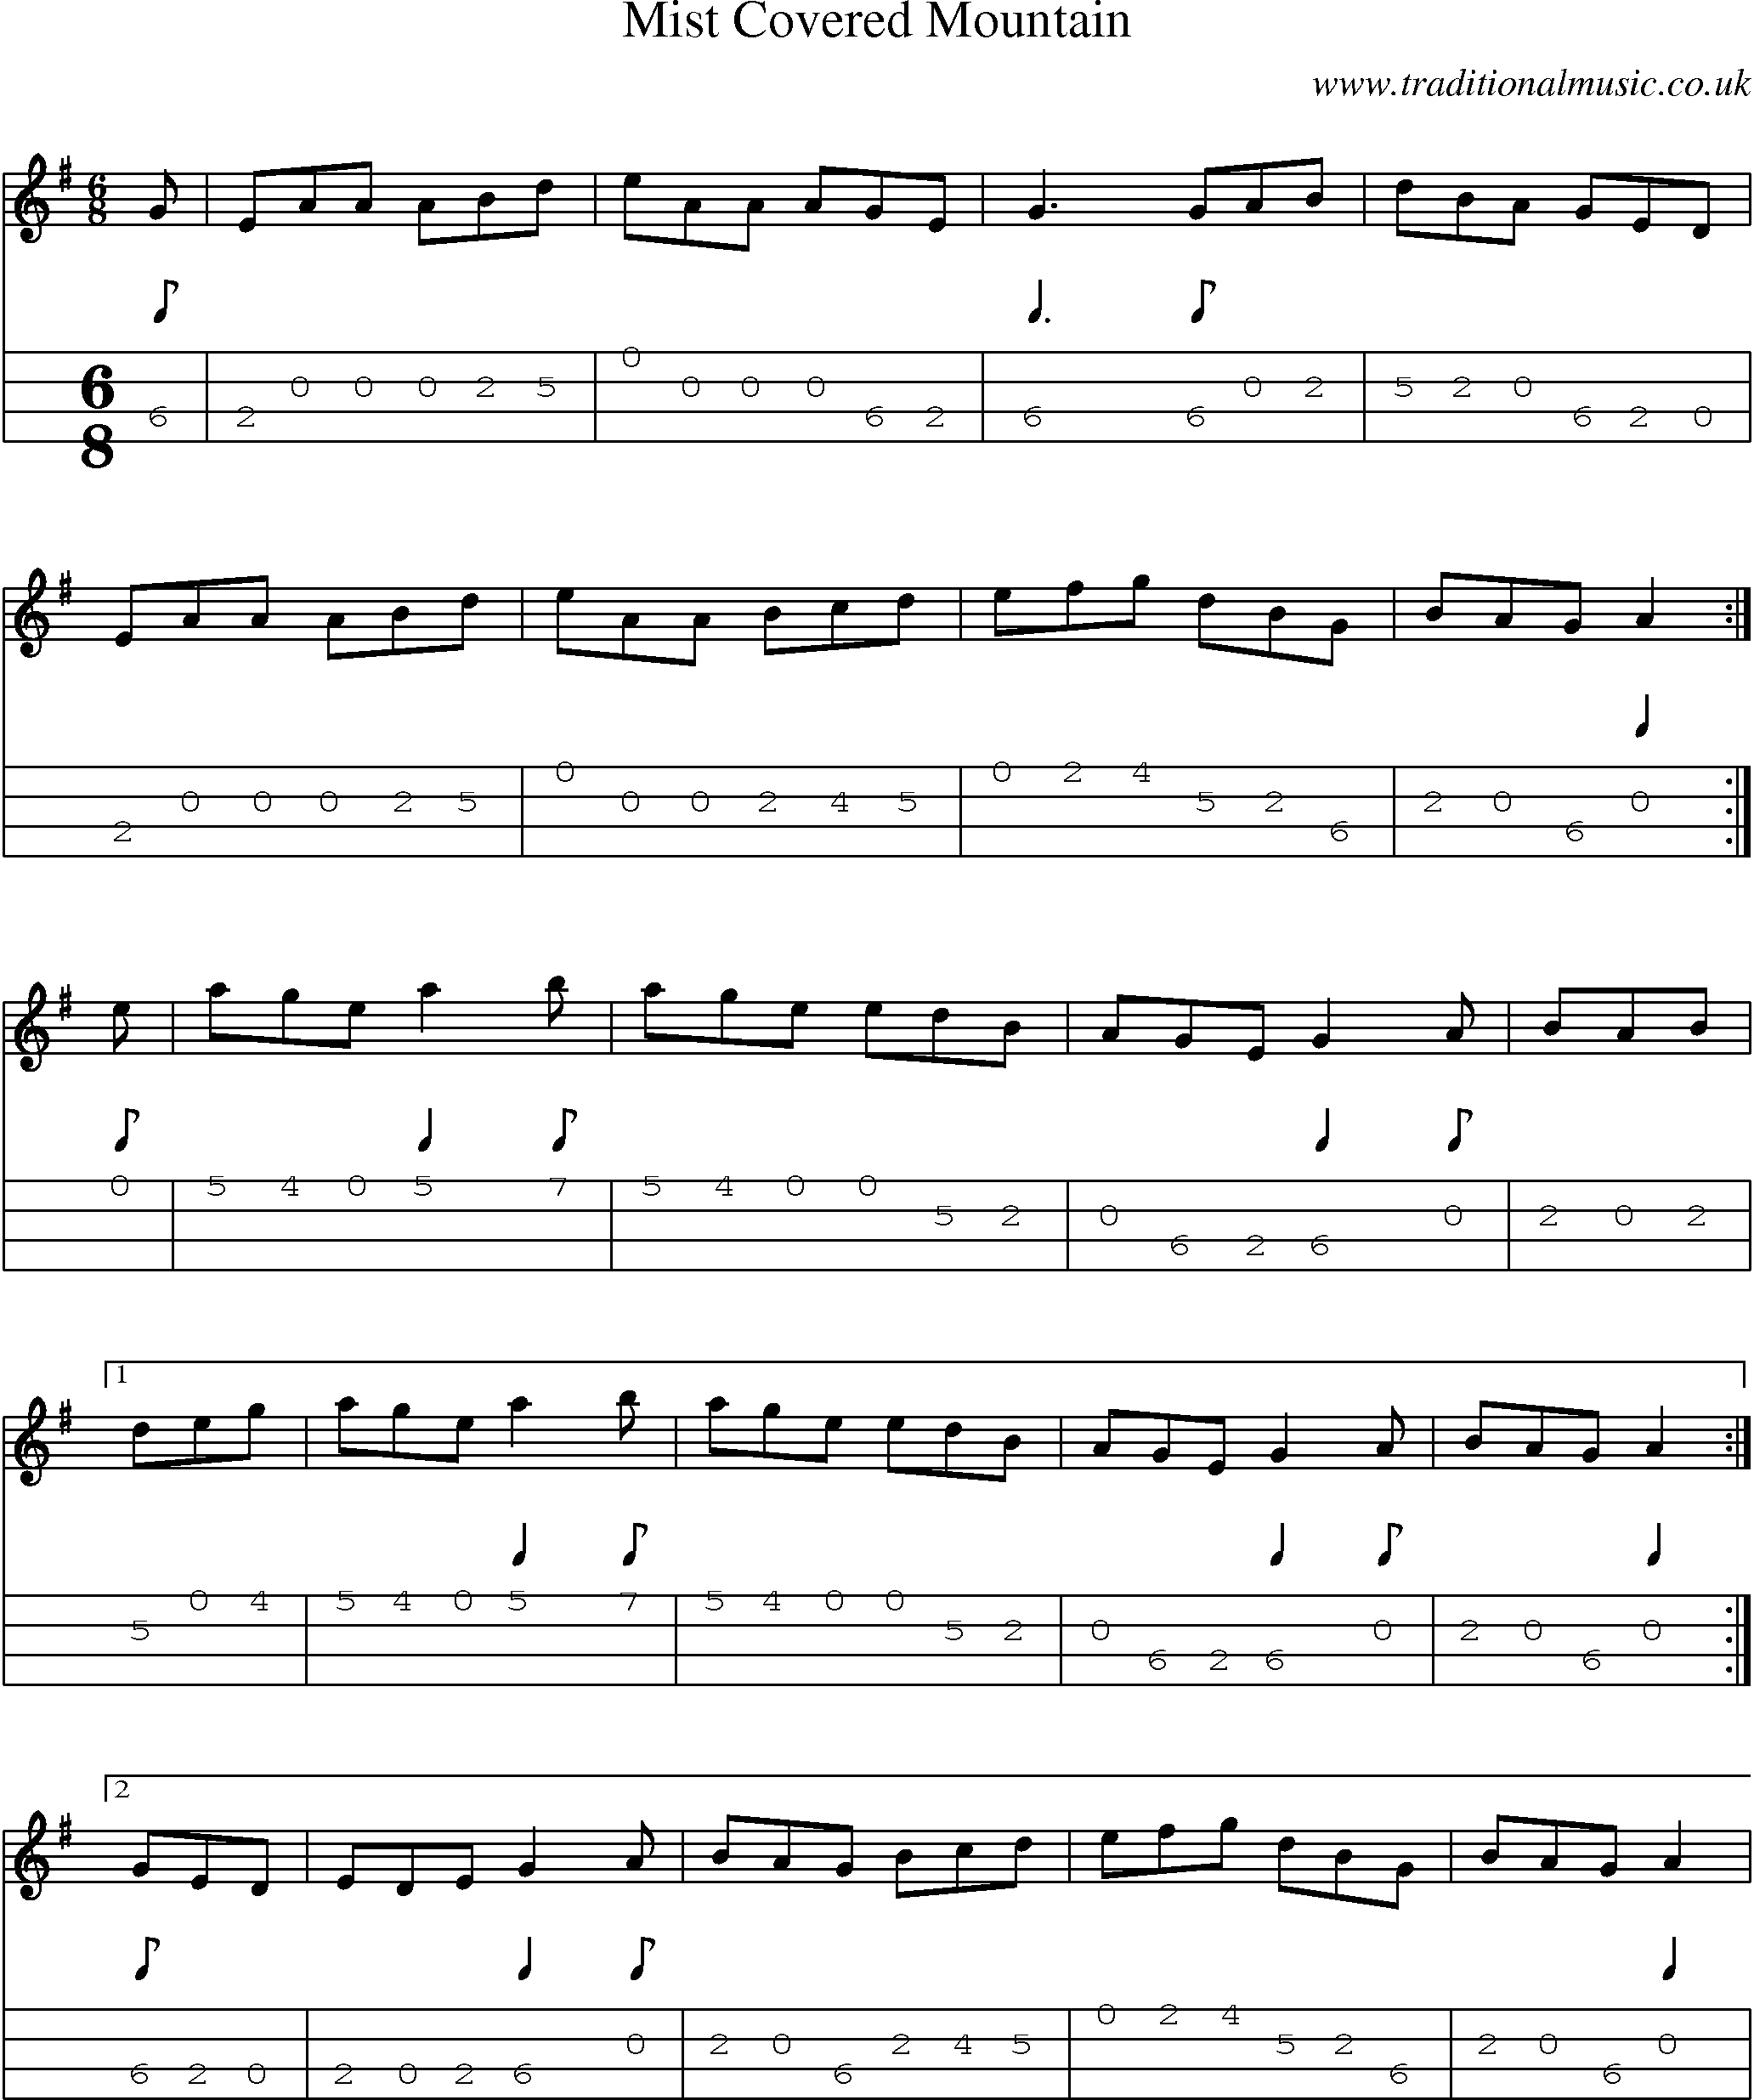 Music Score and Mandolin Tabs for Mist Covered Mountain